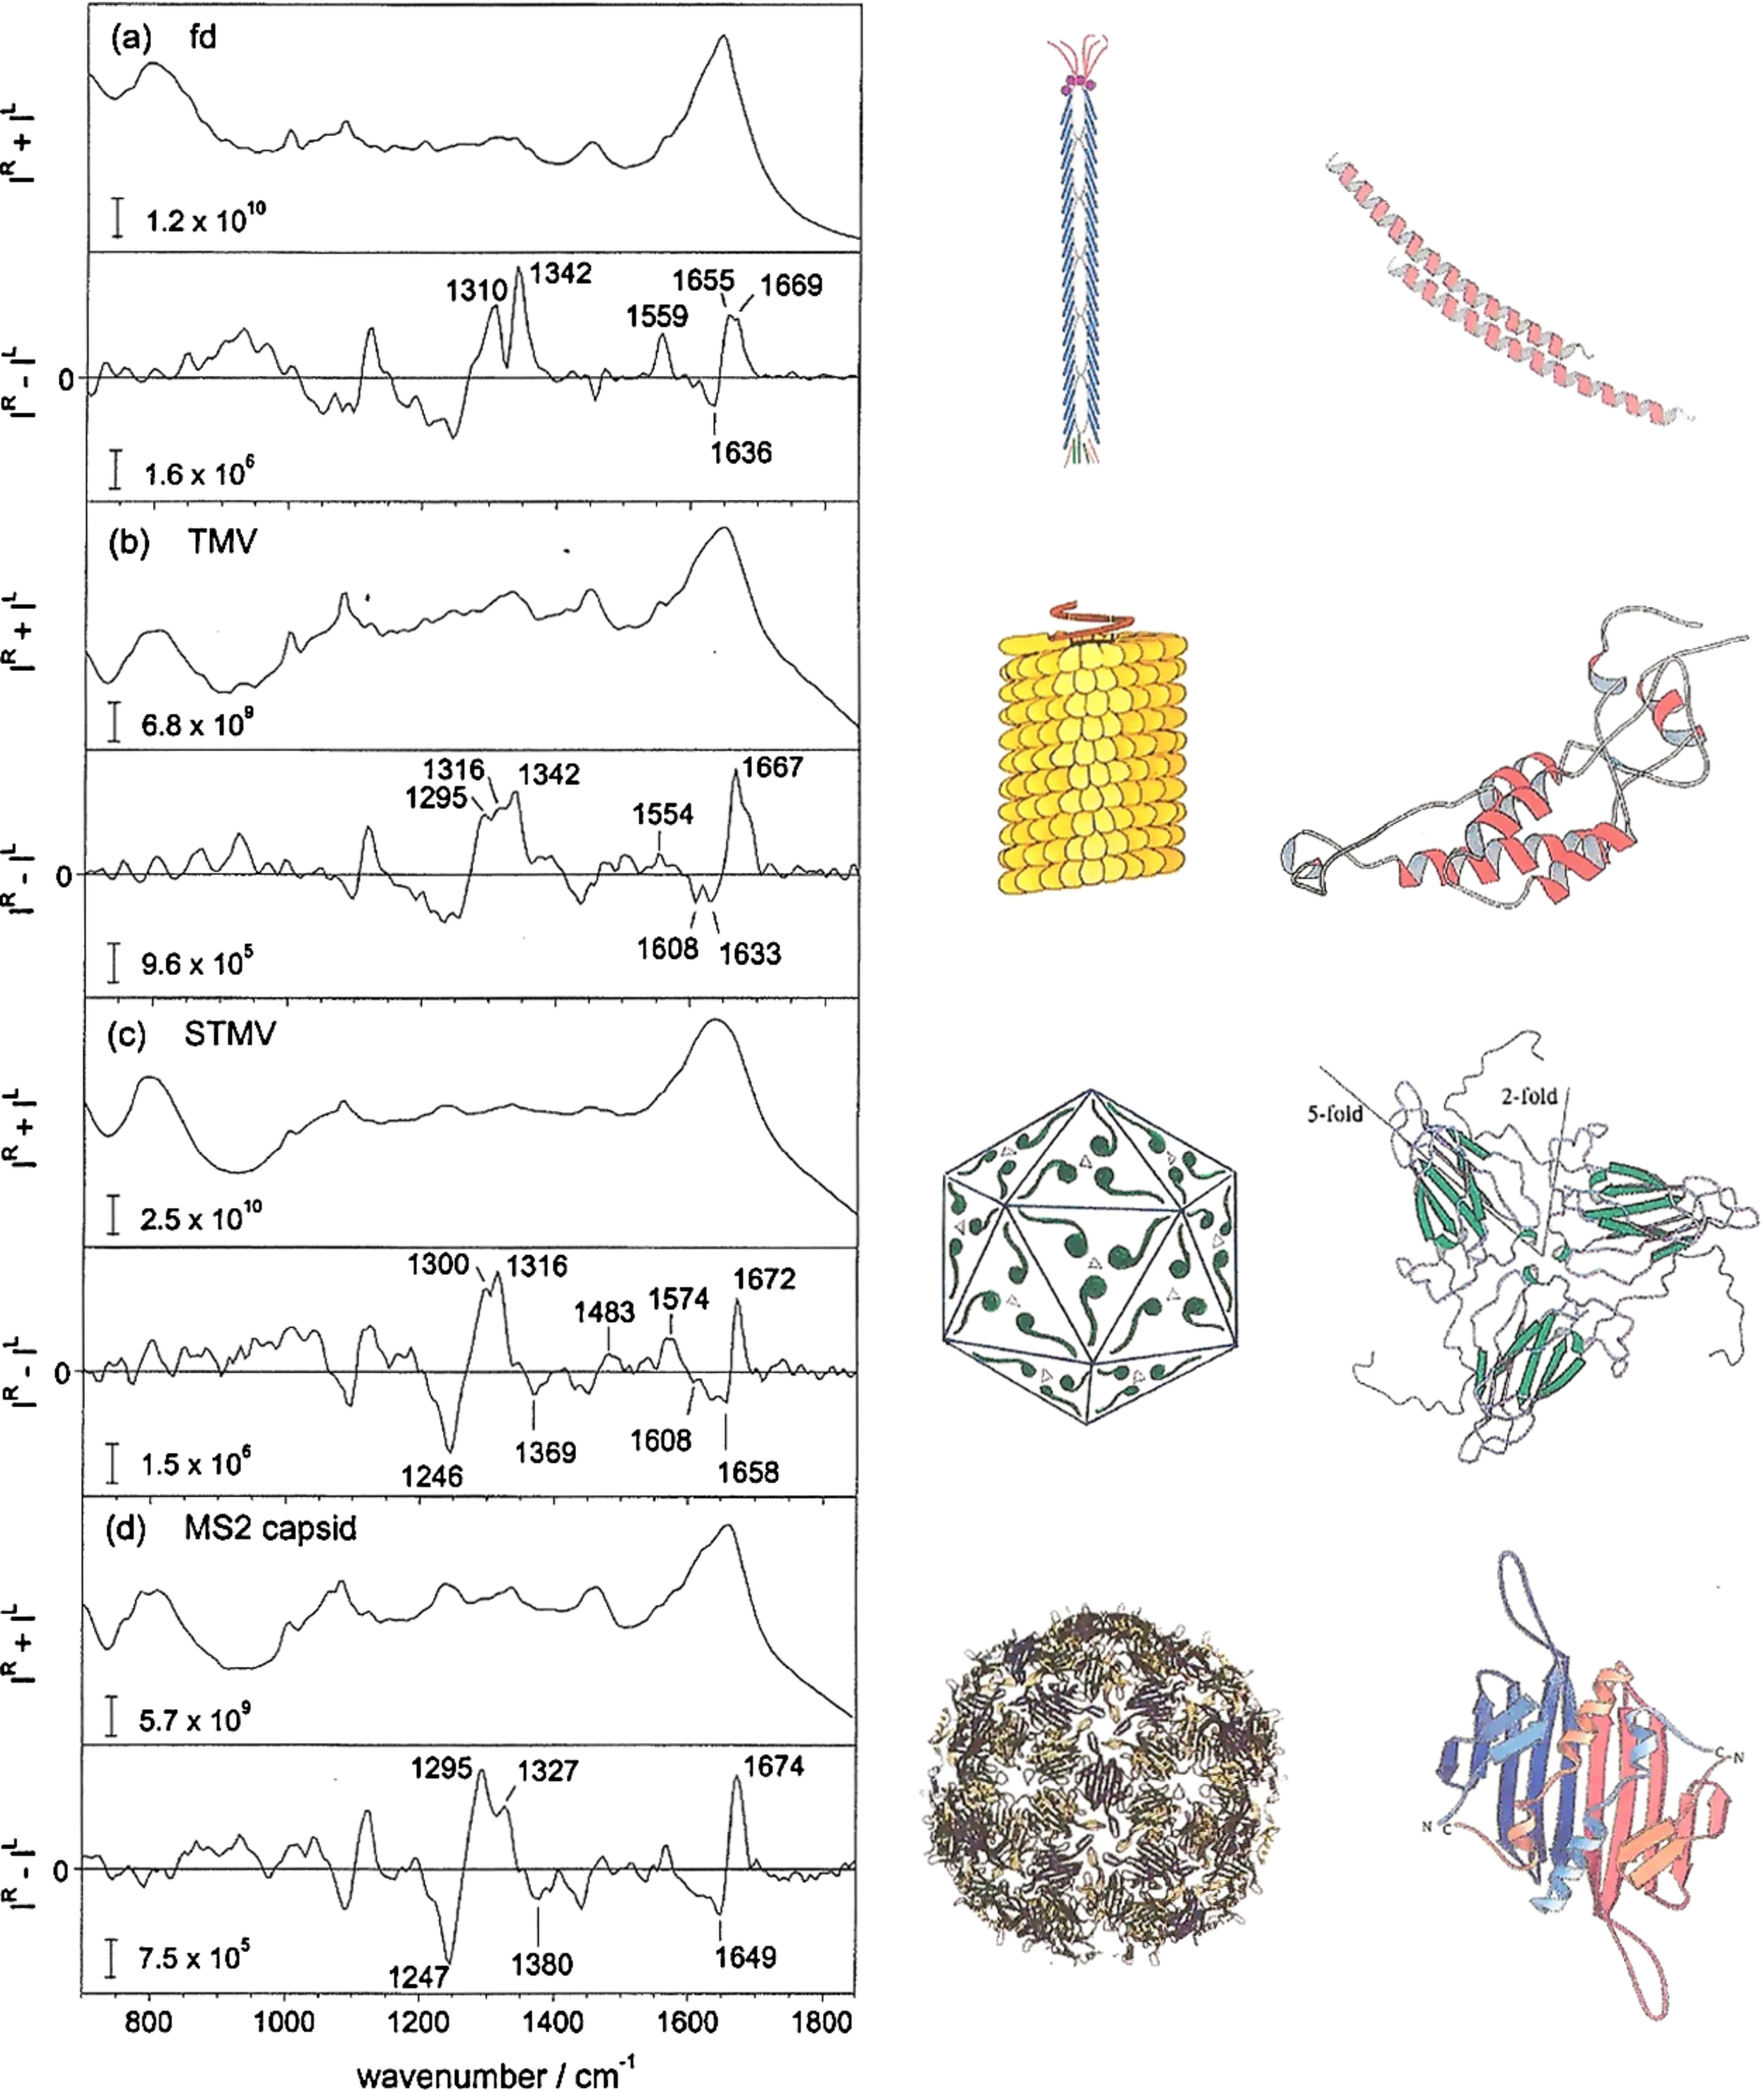 Typical backscattered ICP Raman and ROA spectra of different structural types of virus, all in aqueous solution. The distinct folds of the corresponding major coat proteins are shown on the right. Adapted from [34]. (Colors are visible in the online version of the article; http://dx.doi.org/10.3233/BSI-150113.)